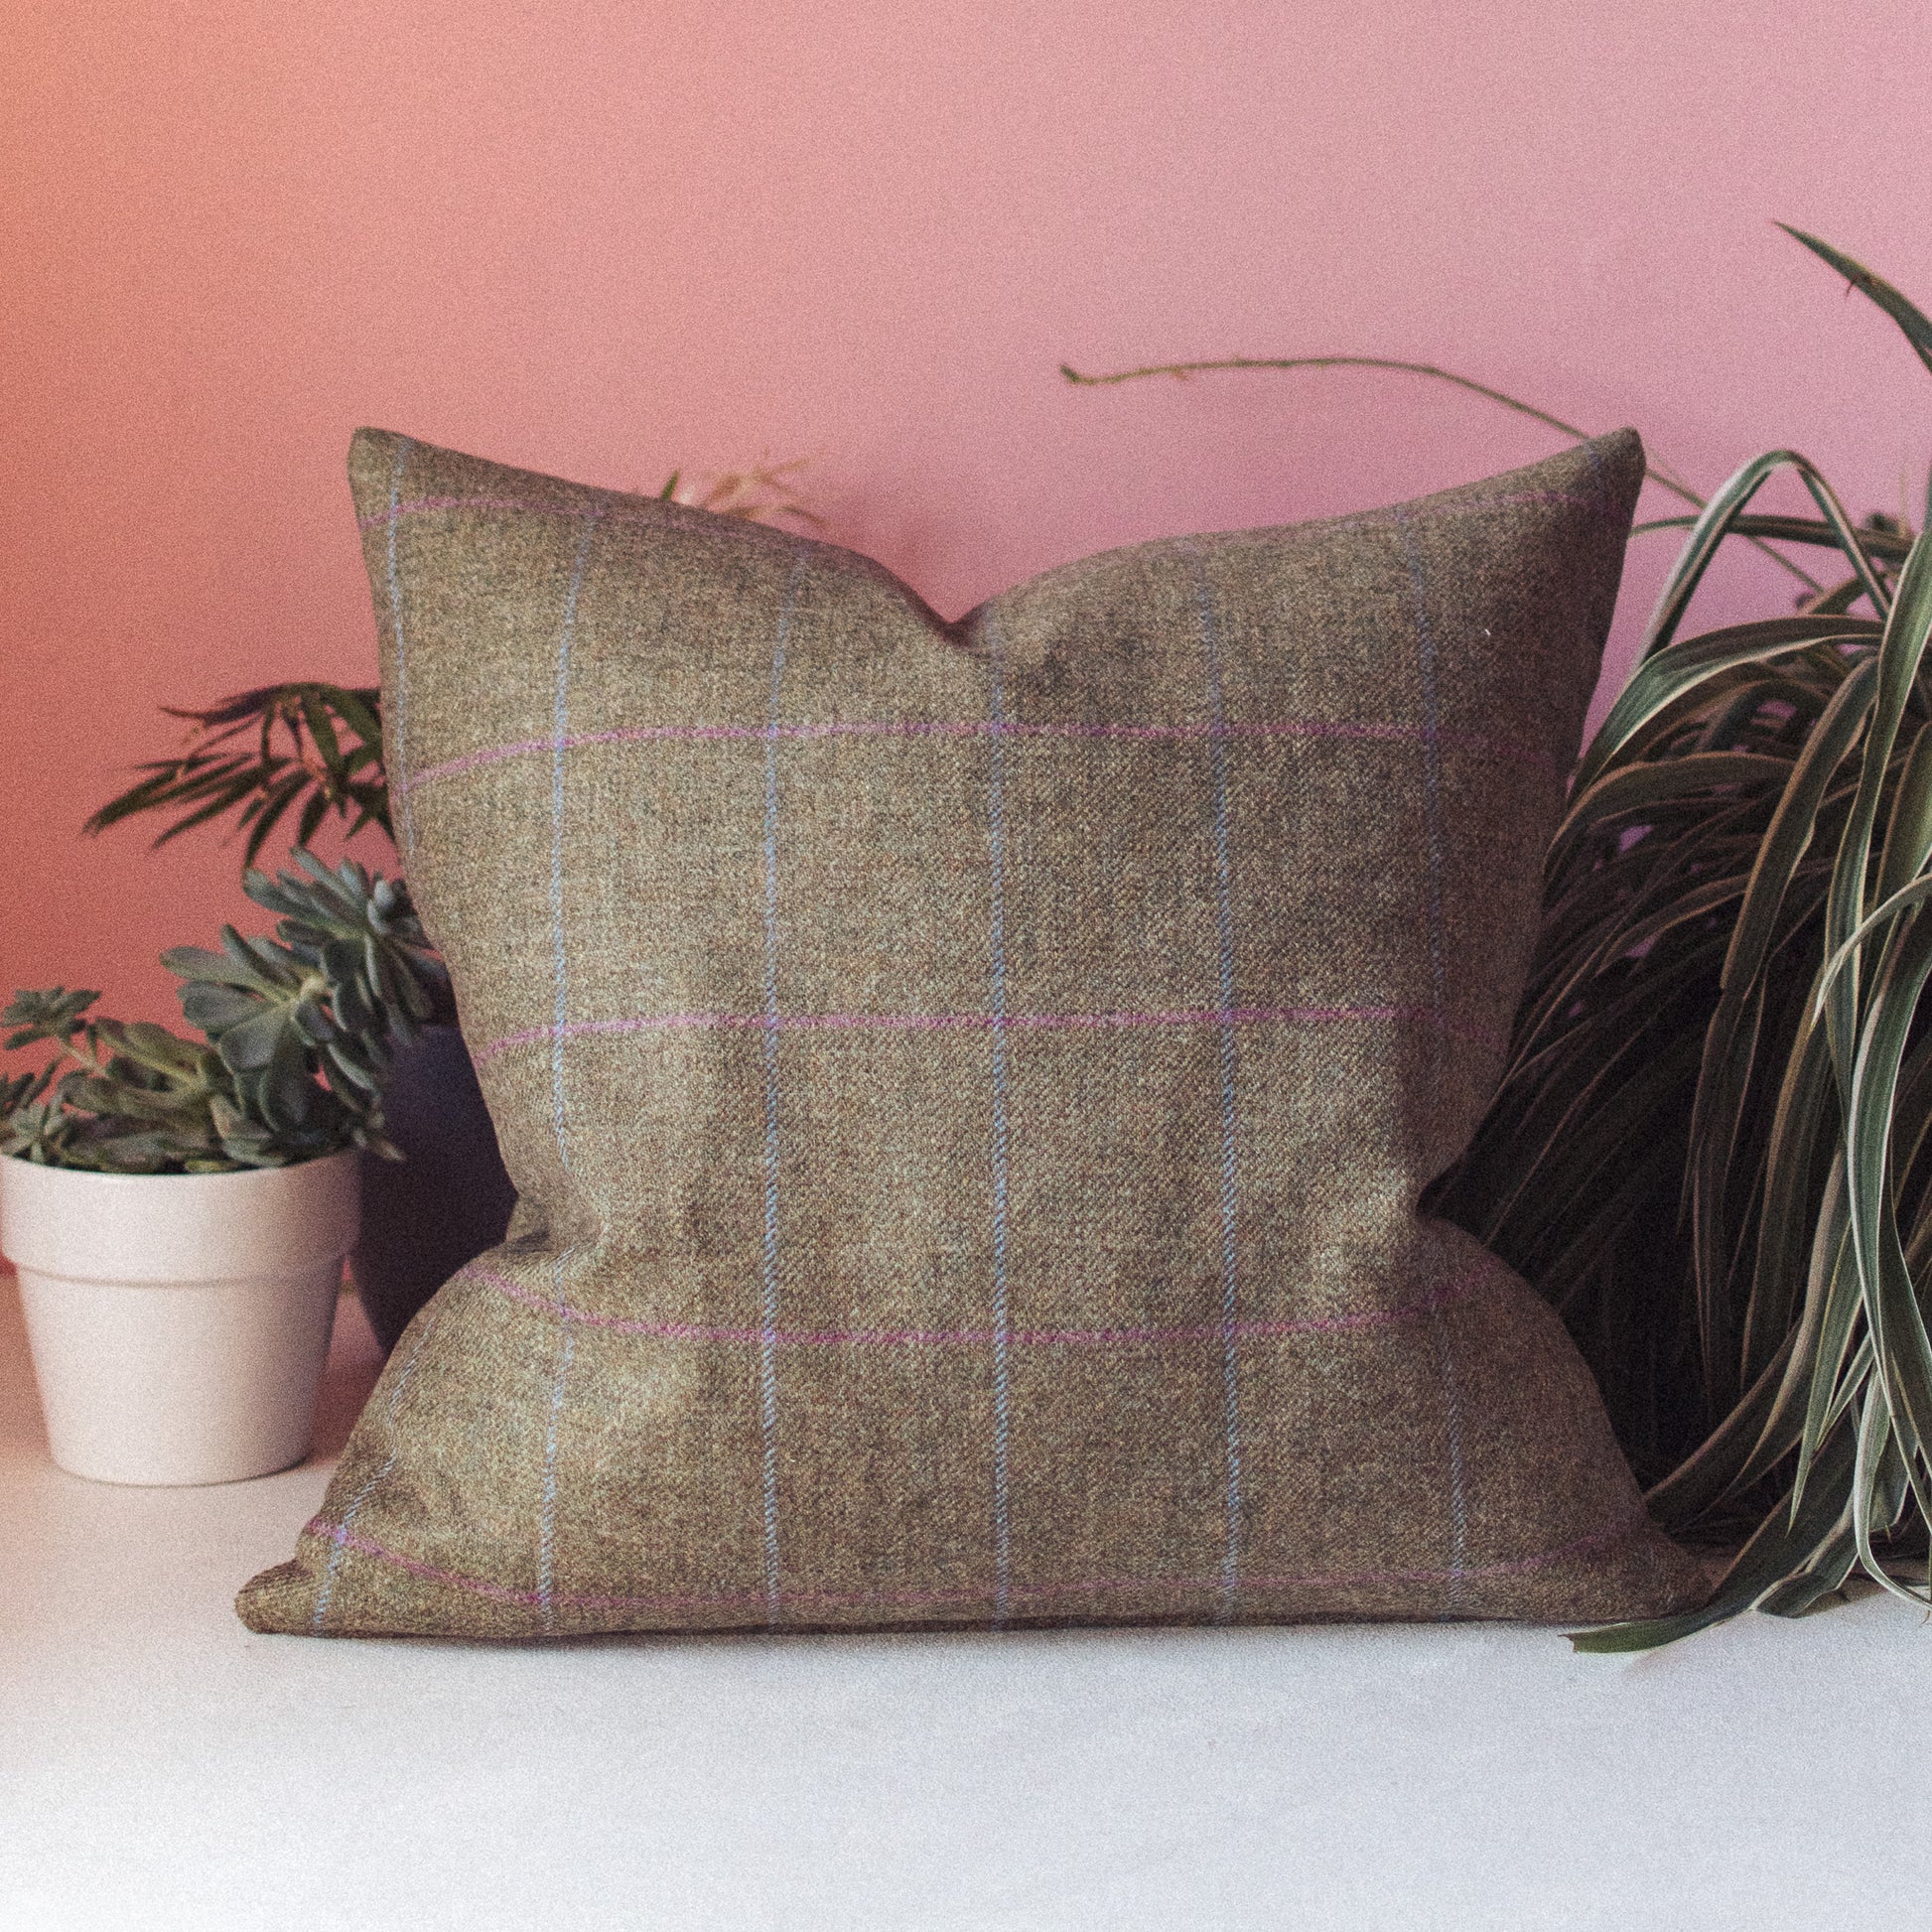 Green Light Blue and Pink Tweed Cushion handmade in yorkshire by F&B - the ideal cushion for country home decor, country abodes and farm house decor